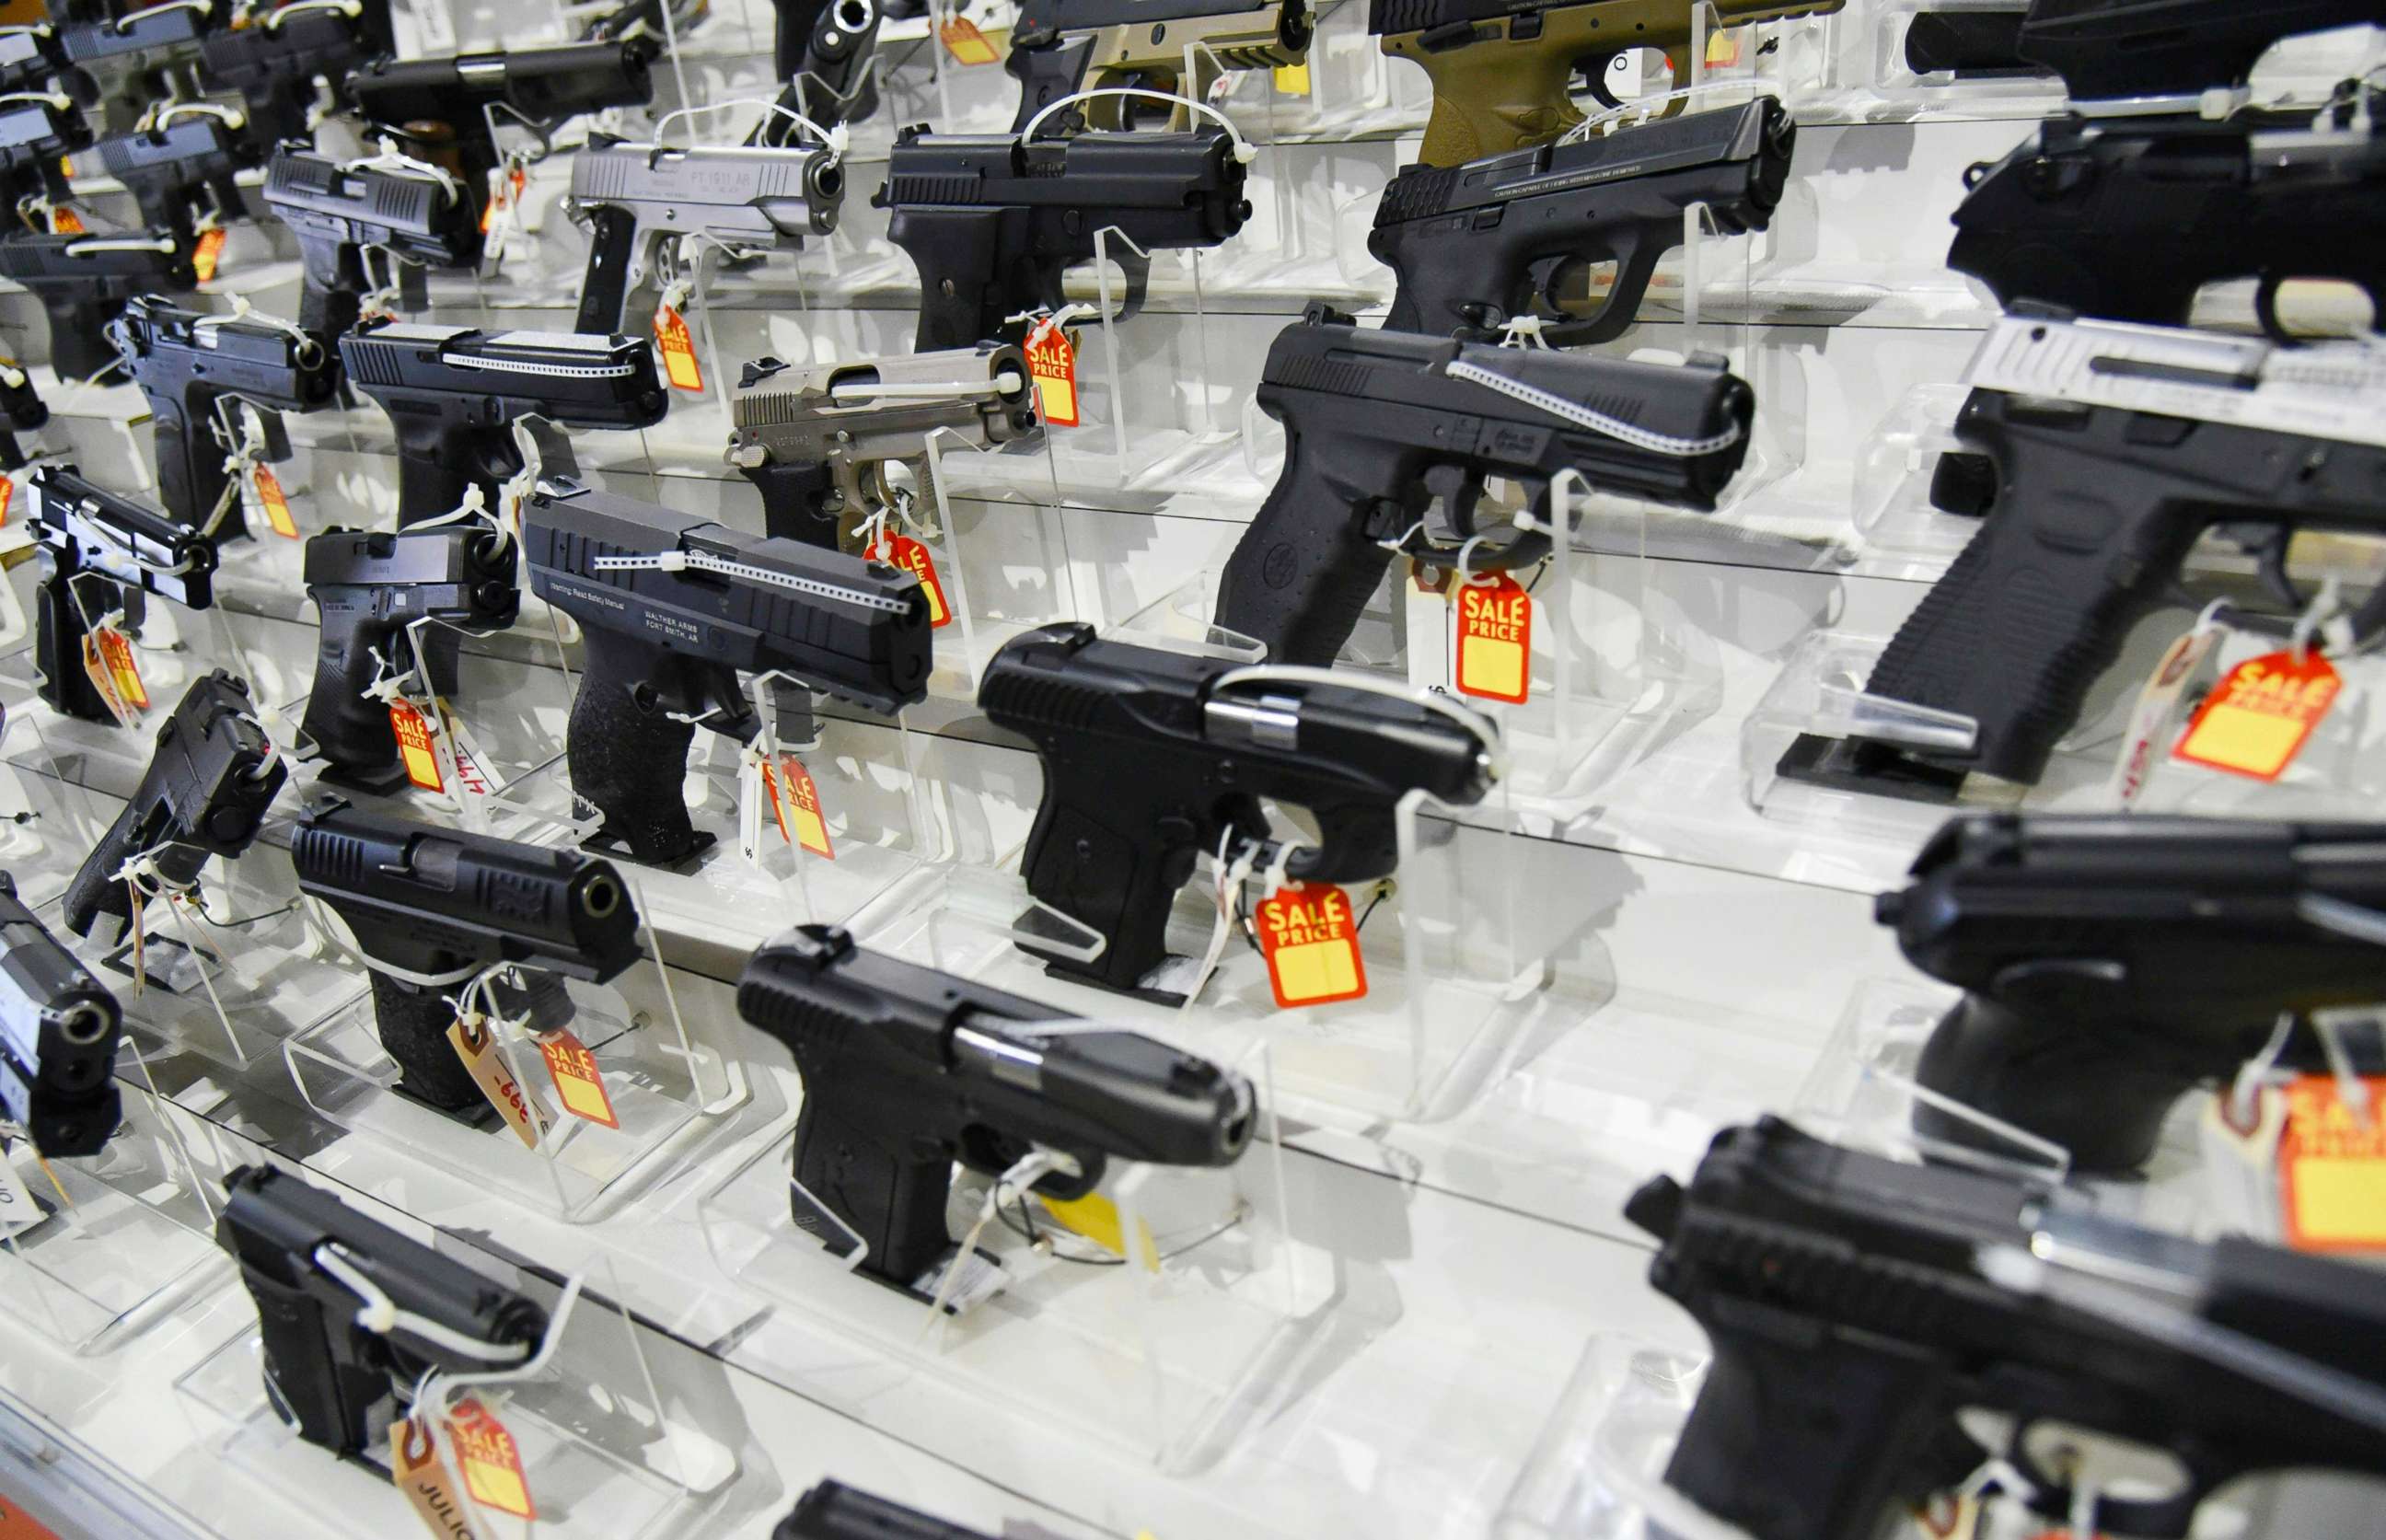 PHOTO: Guns lie in a booth during preparations for a gun show on Feb. 16, 2018, at the Dade County Youth Fairgrounds Fairgrounds in Miami.